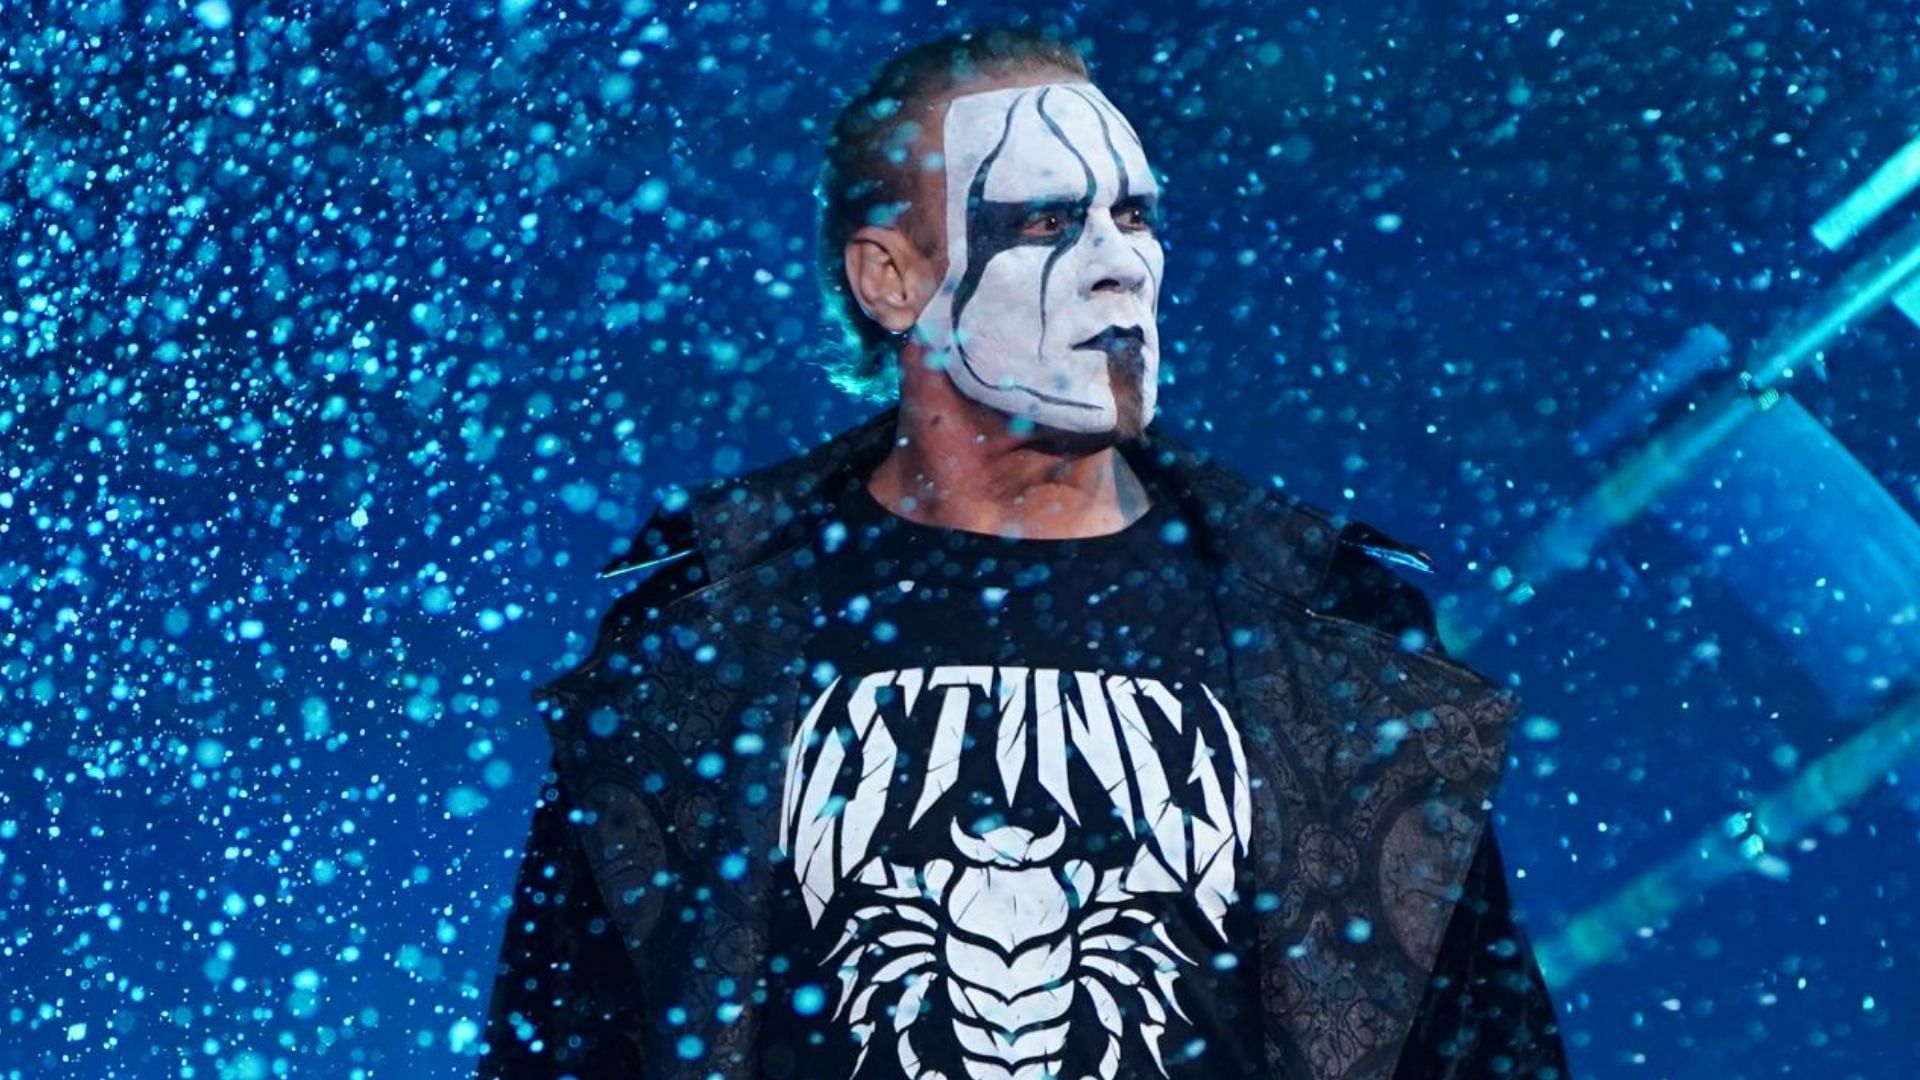 Could fans be in for a dissapointing announcement from Sting this week?